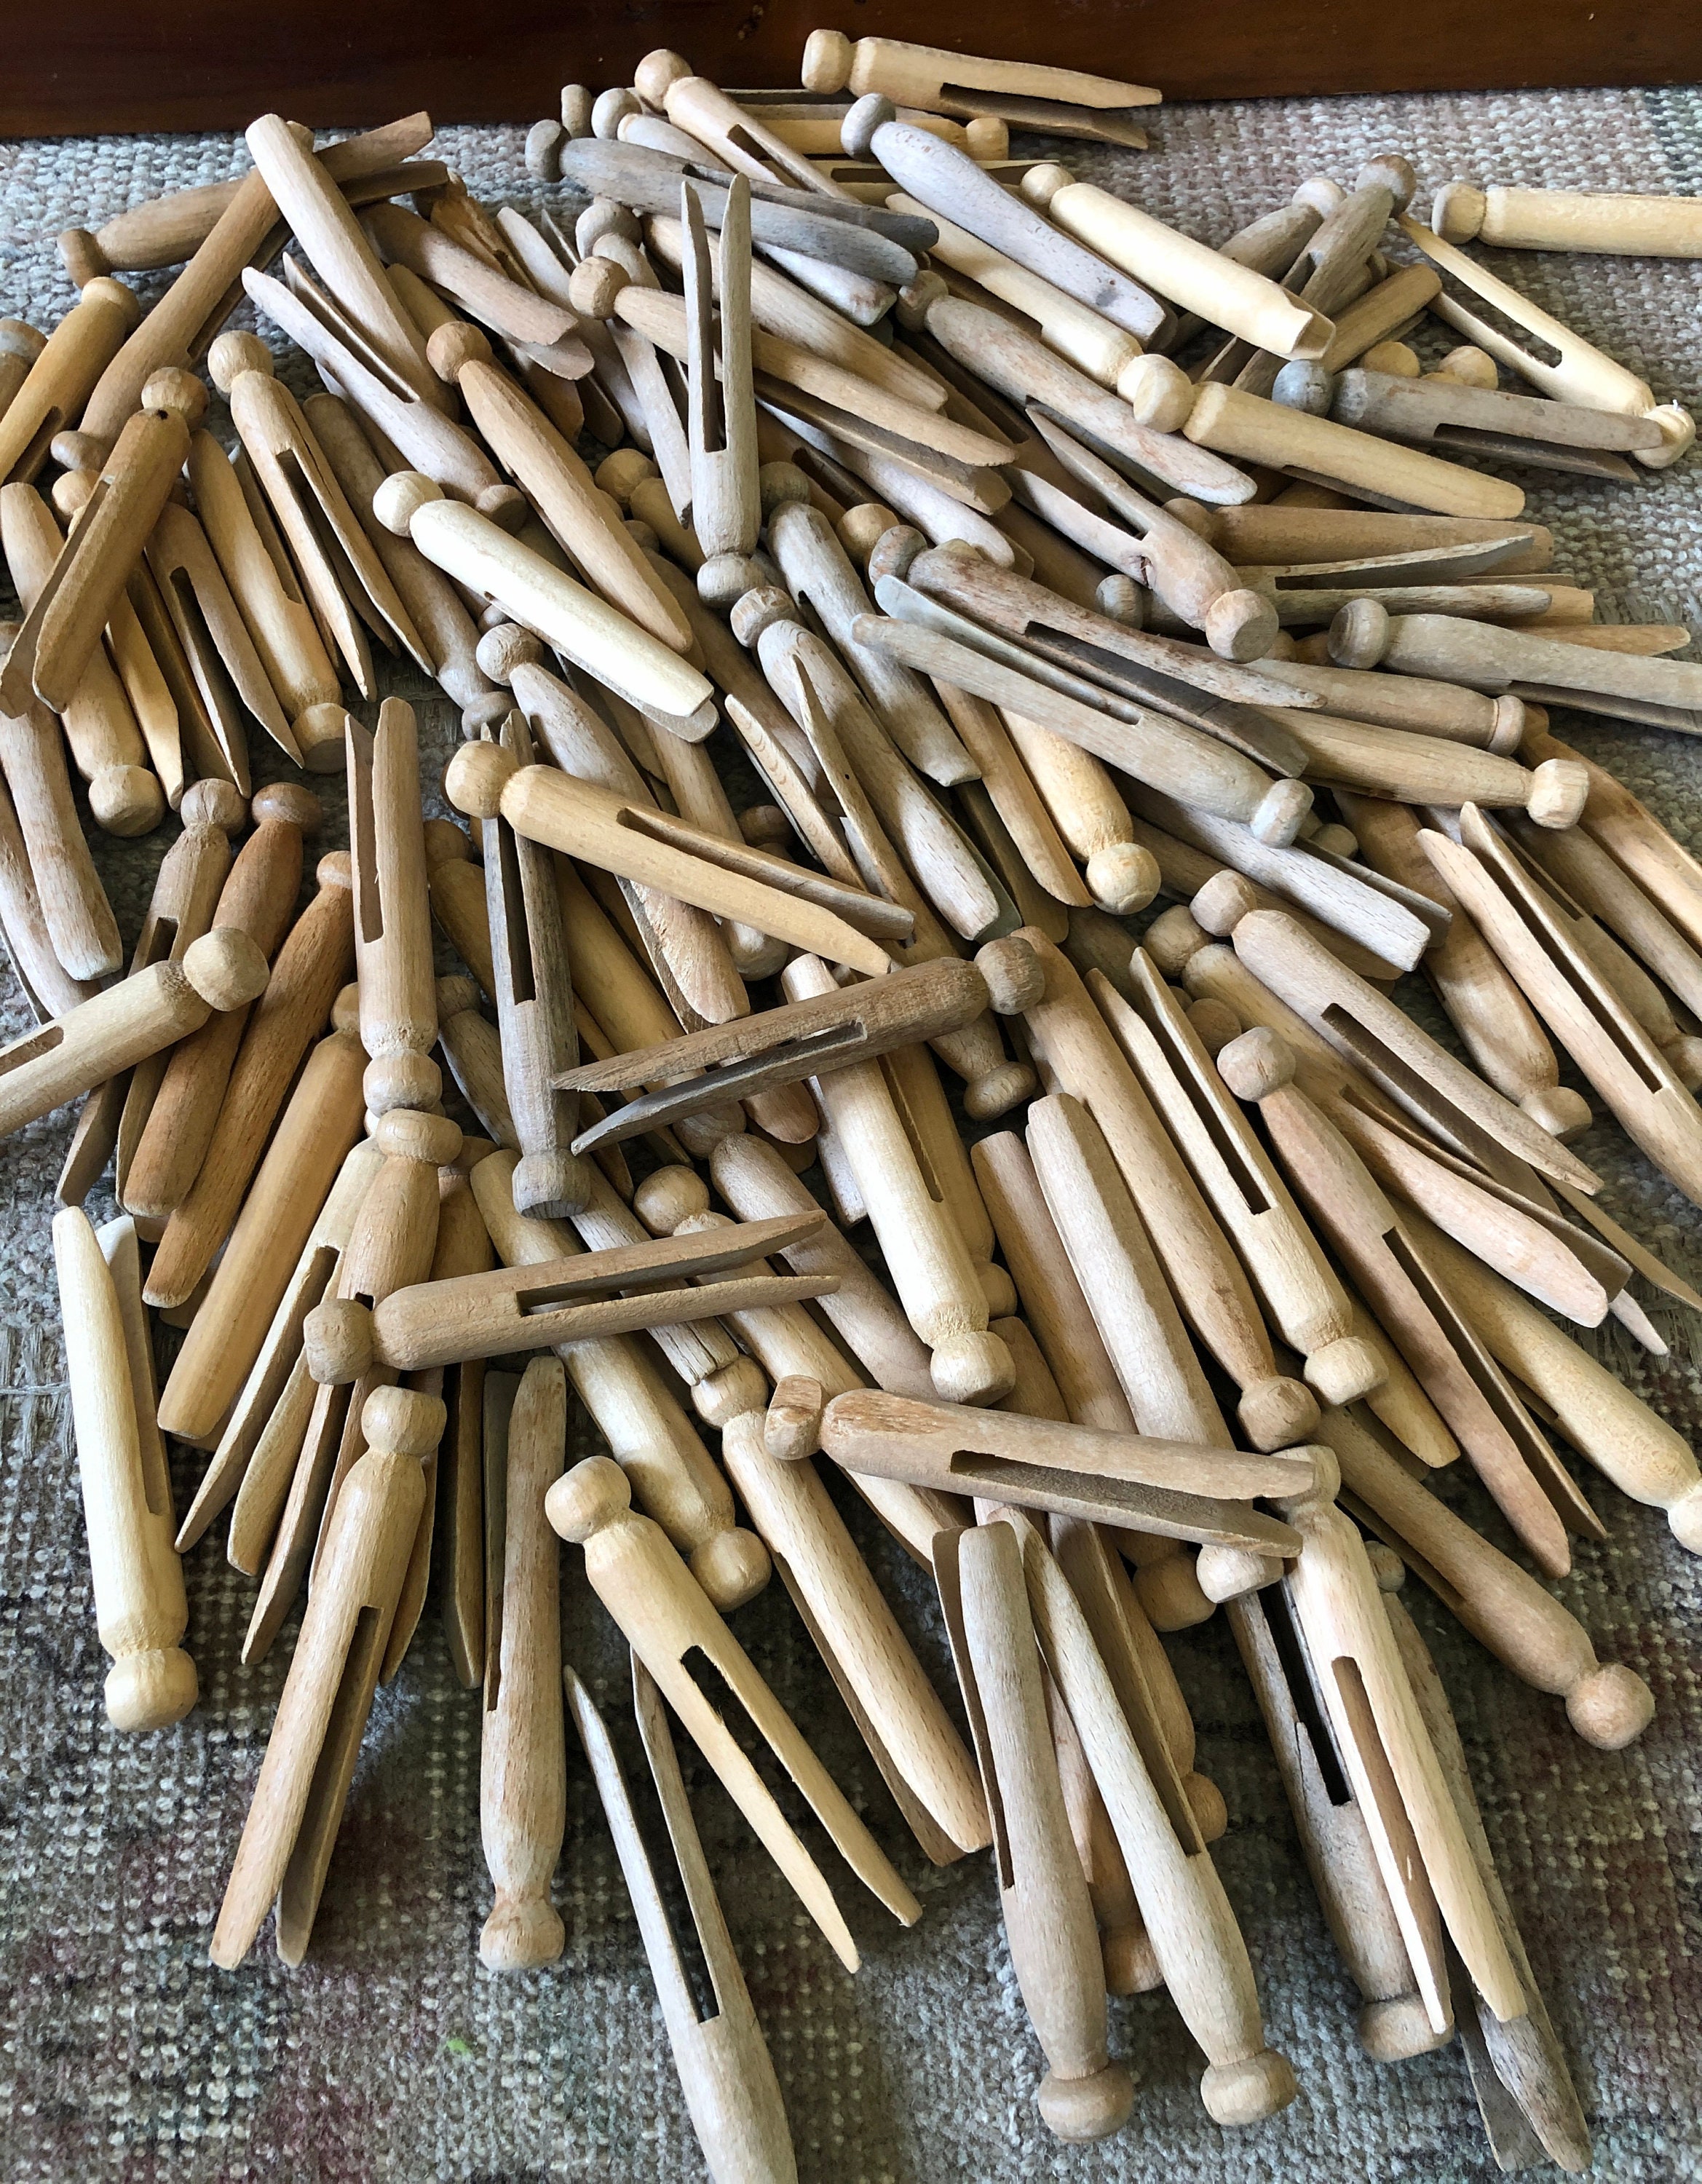 Vintage Lot of 12 Wooden Clothes Pin 4 In Sq Size Ex Used Condition Early